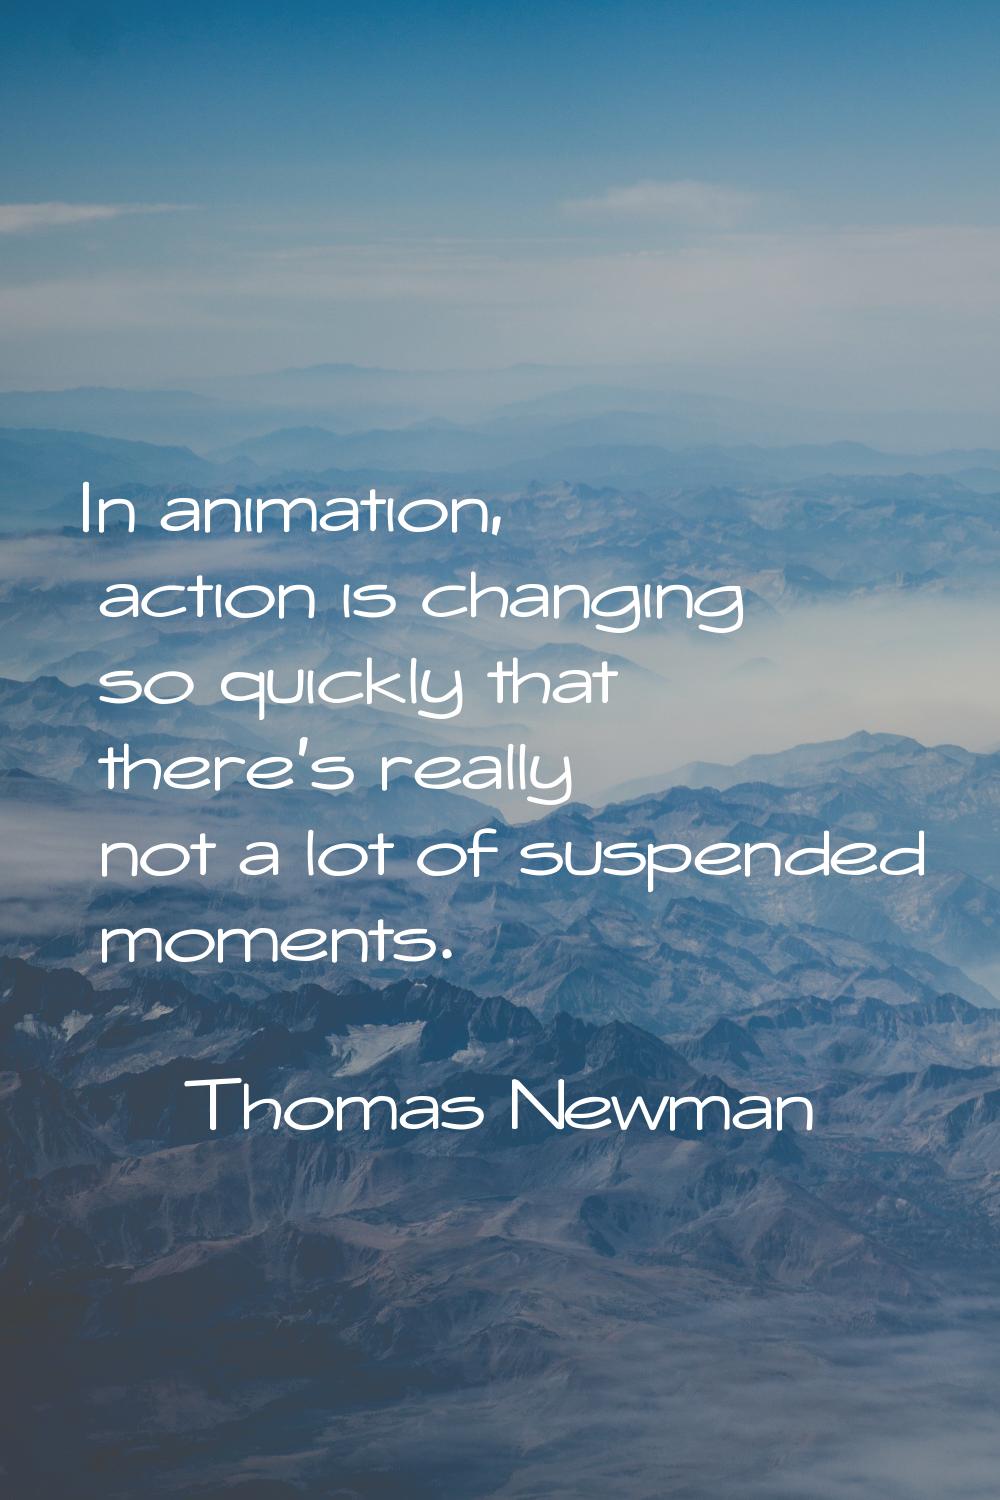 In animation, action is changing so quickly that there's really not a lot of suspended moments.